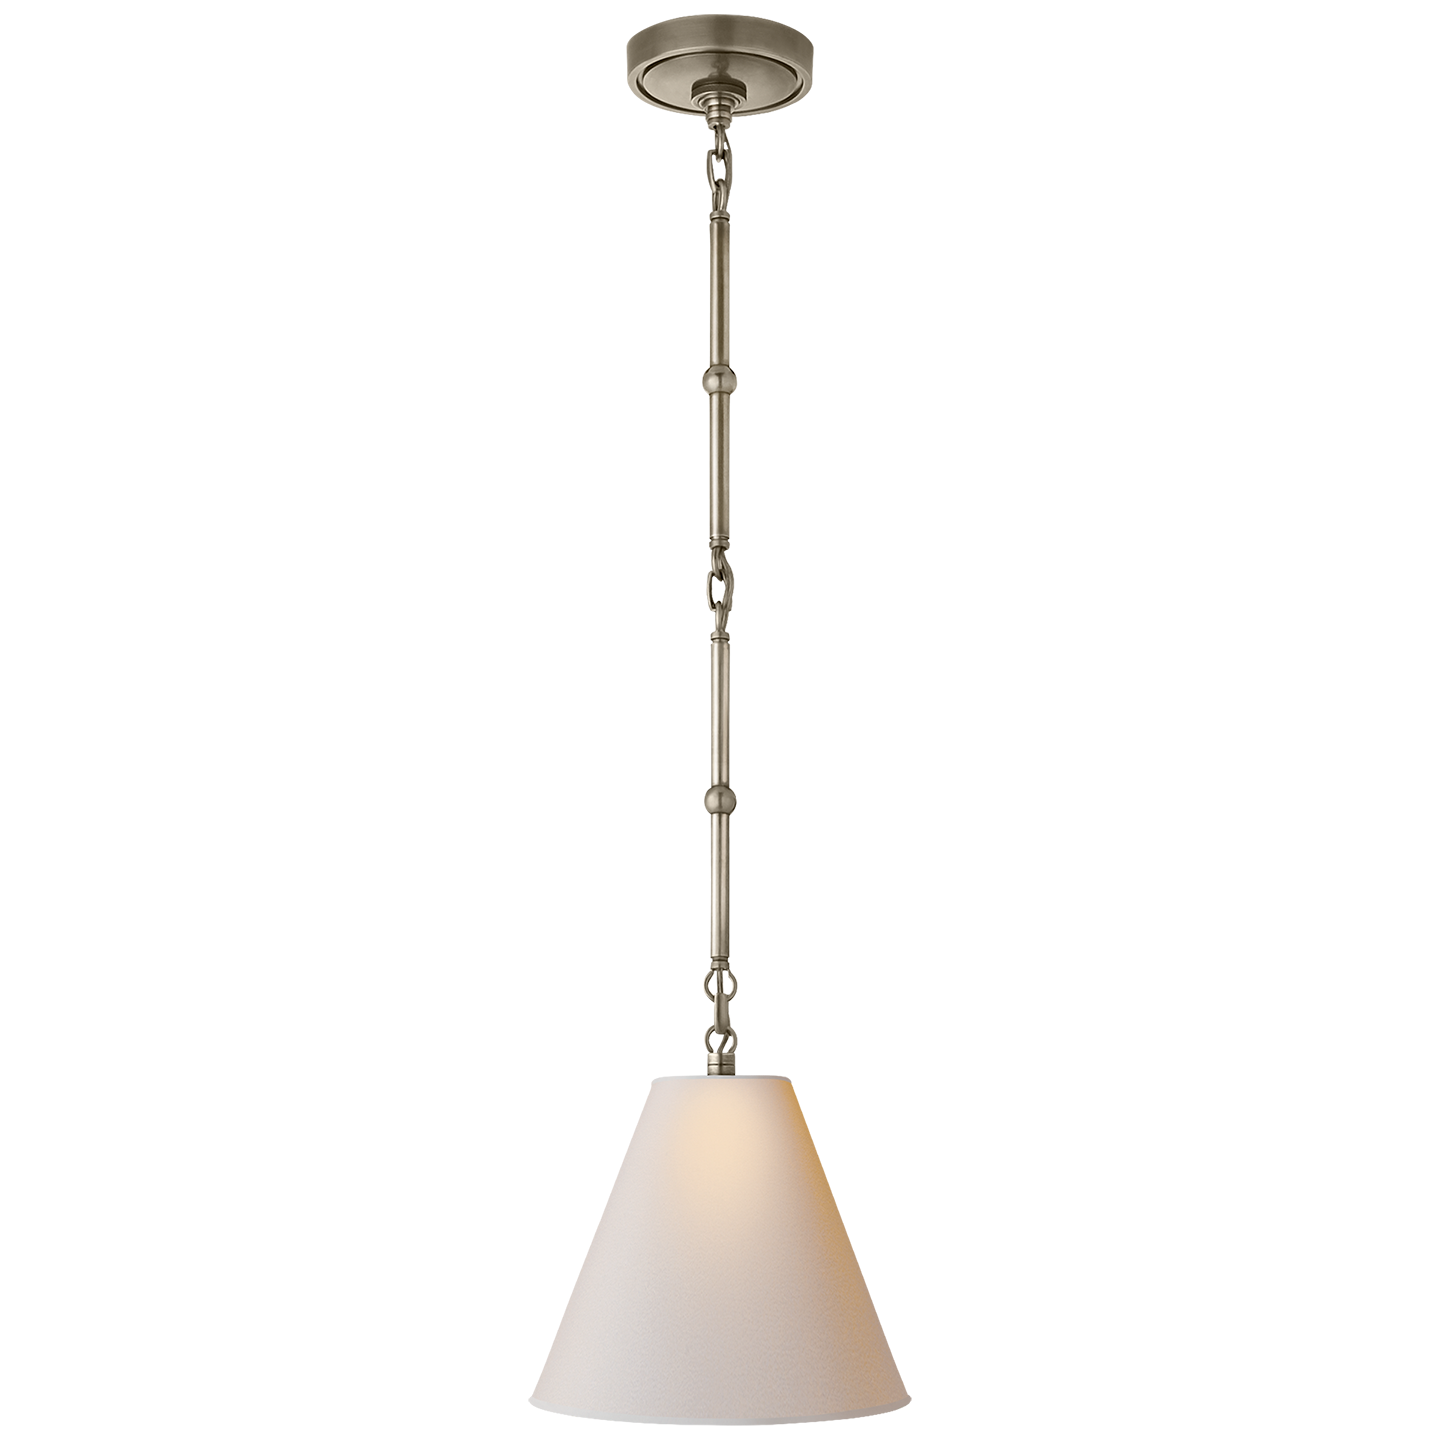 Thomas O'Brien Goodman Small Hanging Light in Bronze and Hand-Rubbed  Antique Brass with Hand-Rubbed Antique Brass Shade